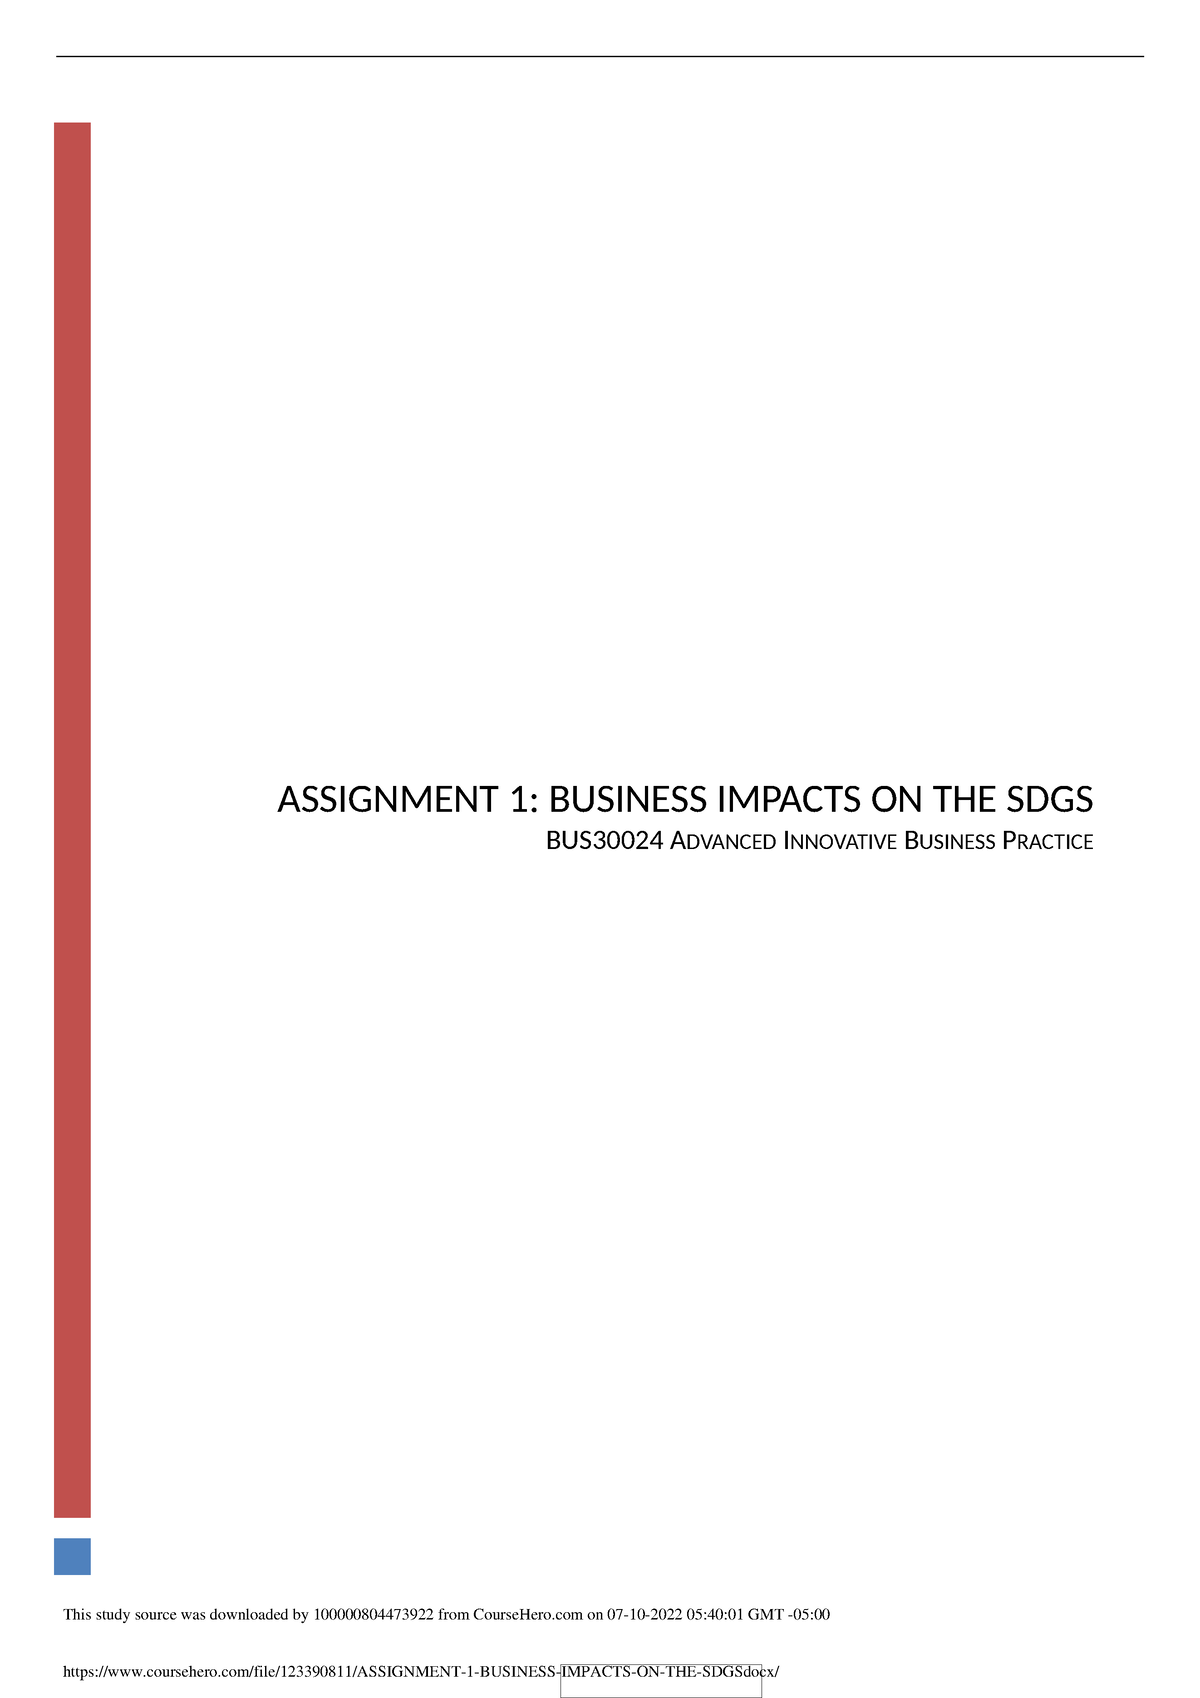 assignment 1 business impacts on the sdgs